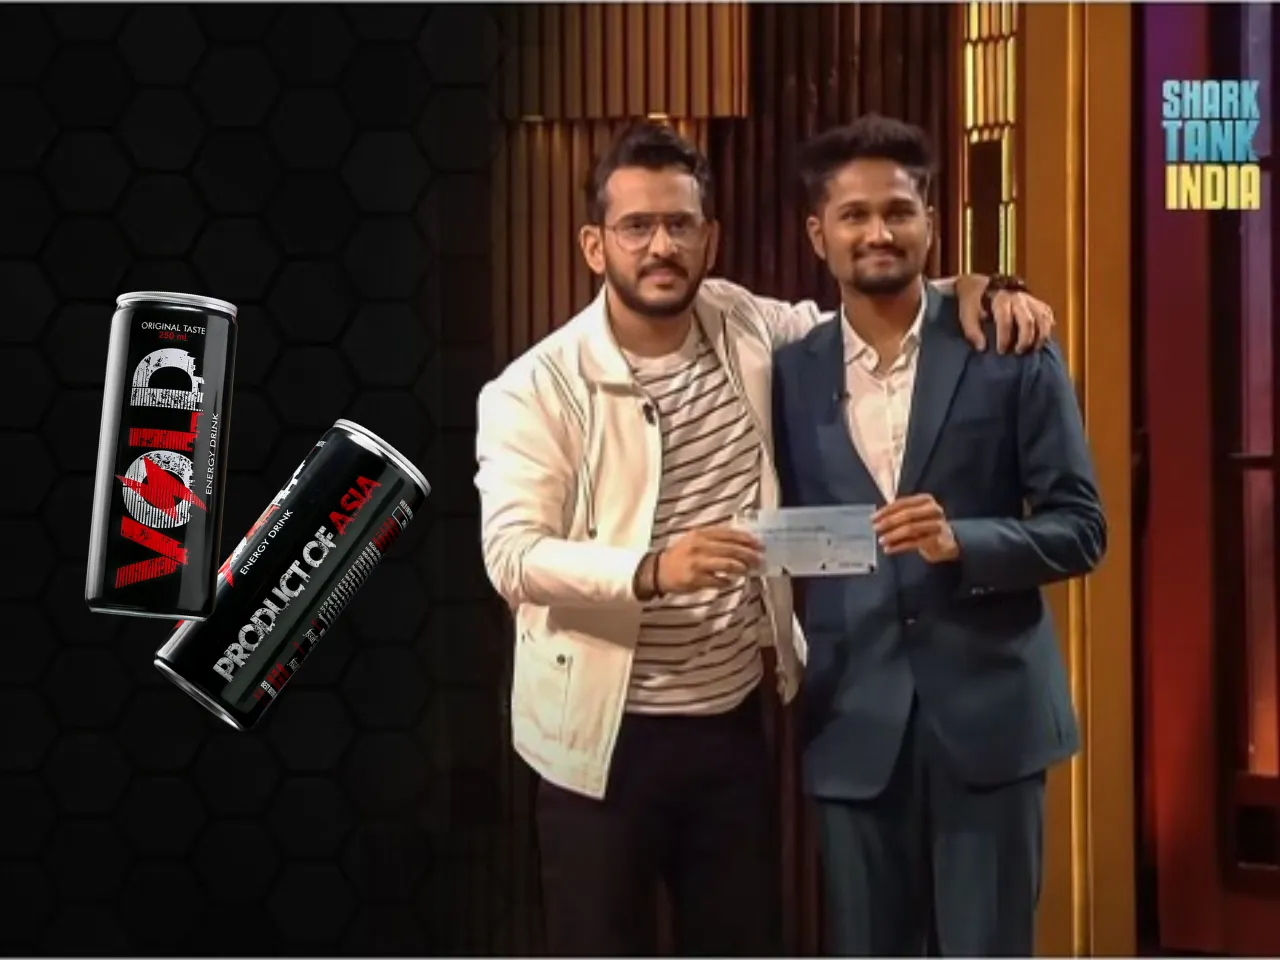 Vold Energy Drink from a small village, cracks the deal in S3 of Shark Tank India!